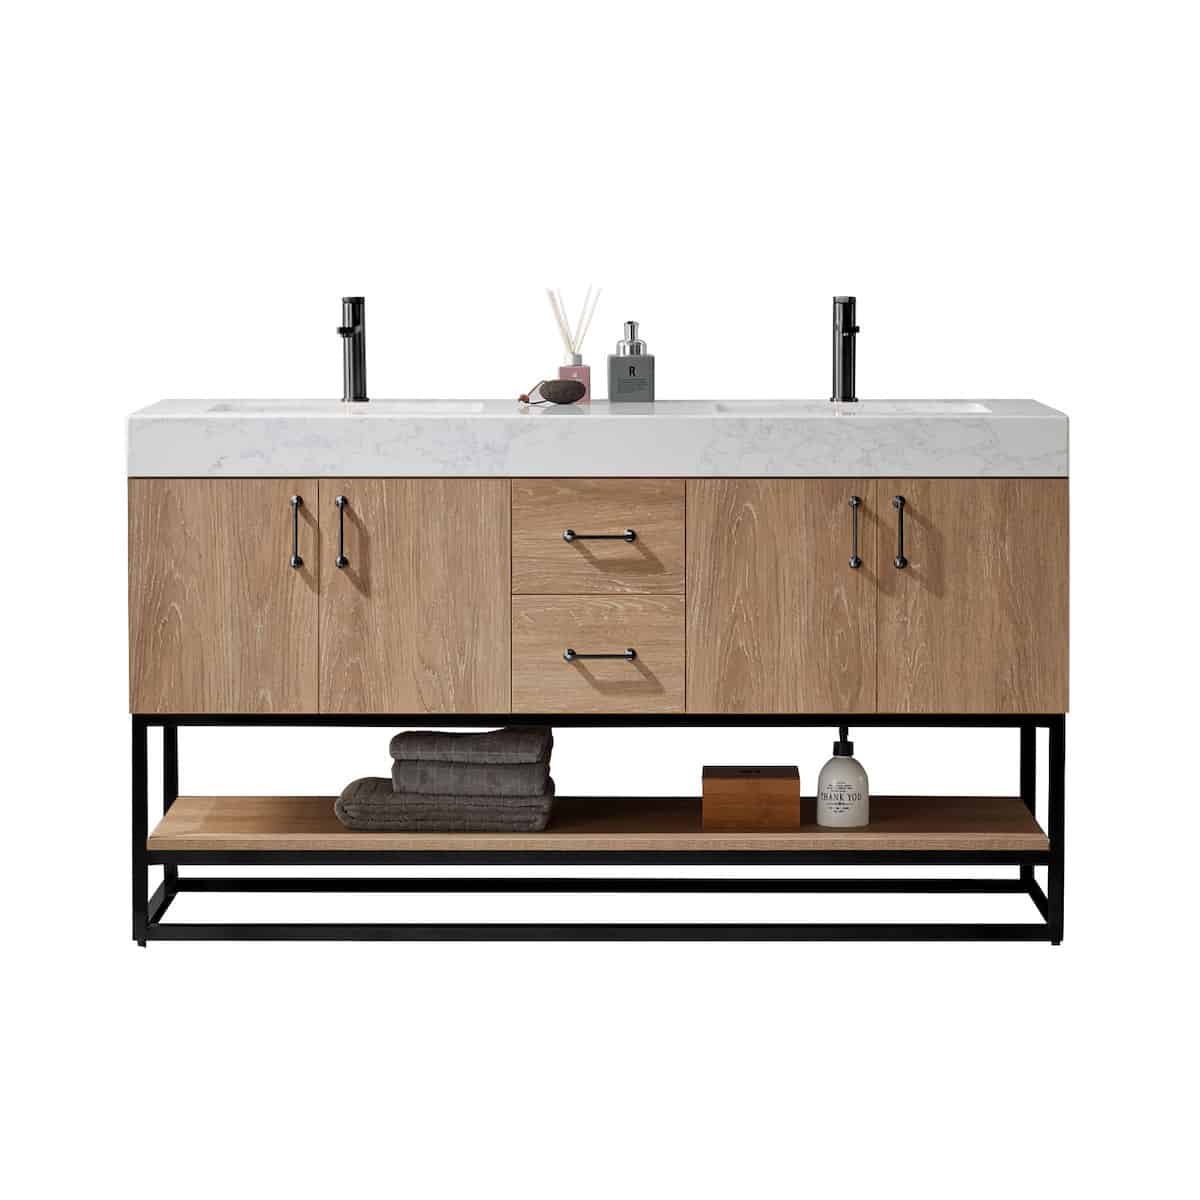 Vinnova Alistair 60 Inch Freestanding Double Vanity in North American Oak and Matte Black Frame with White Grain Stone Countertop Without Mirrors 789060B-NO-GW-NM